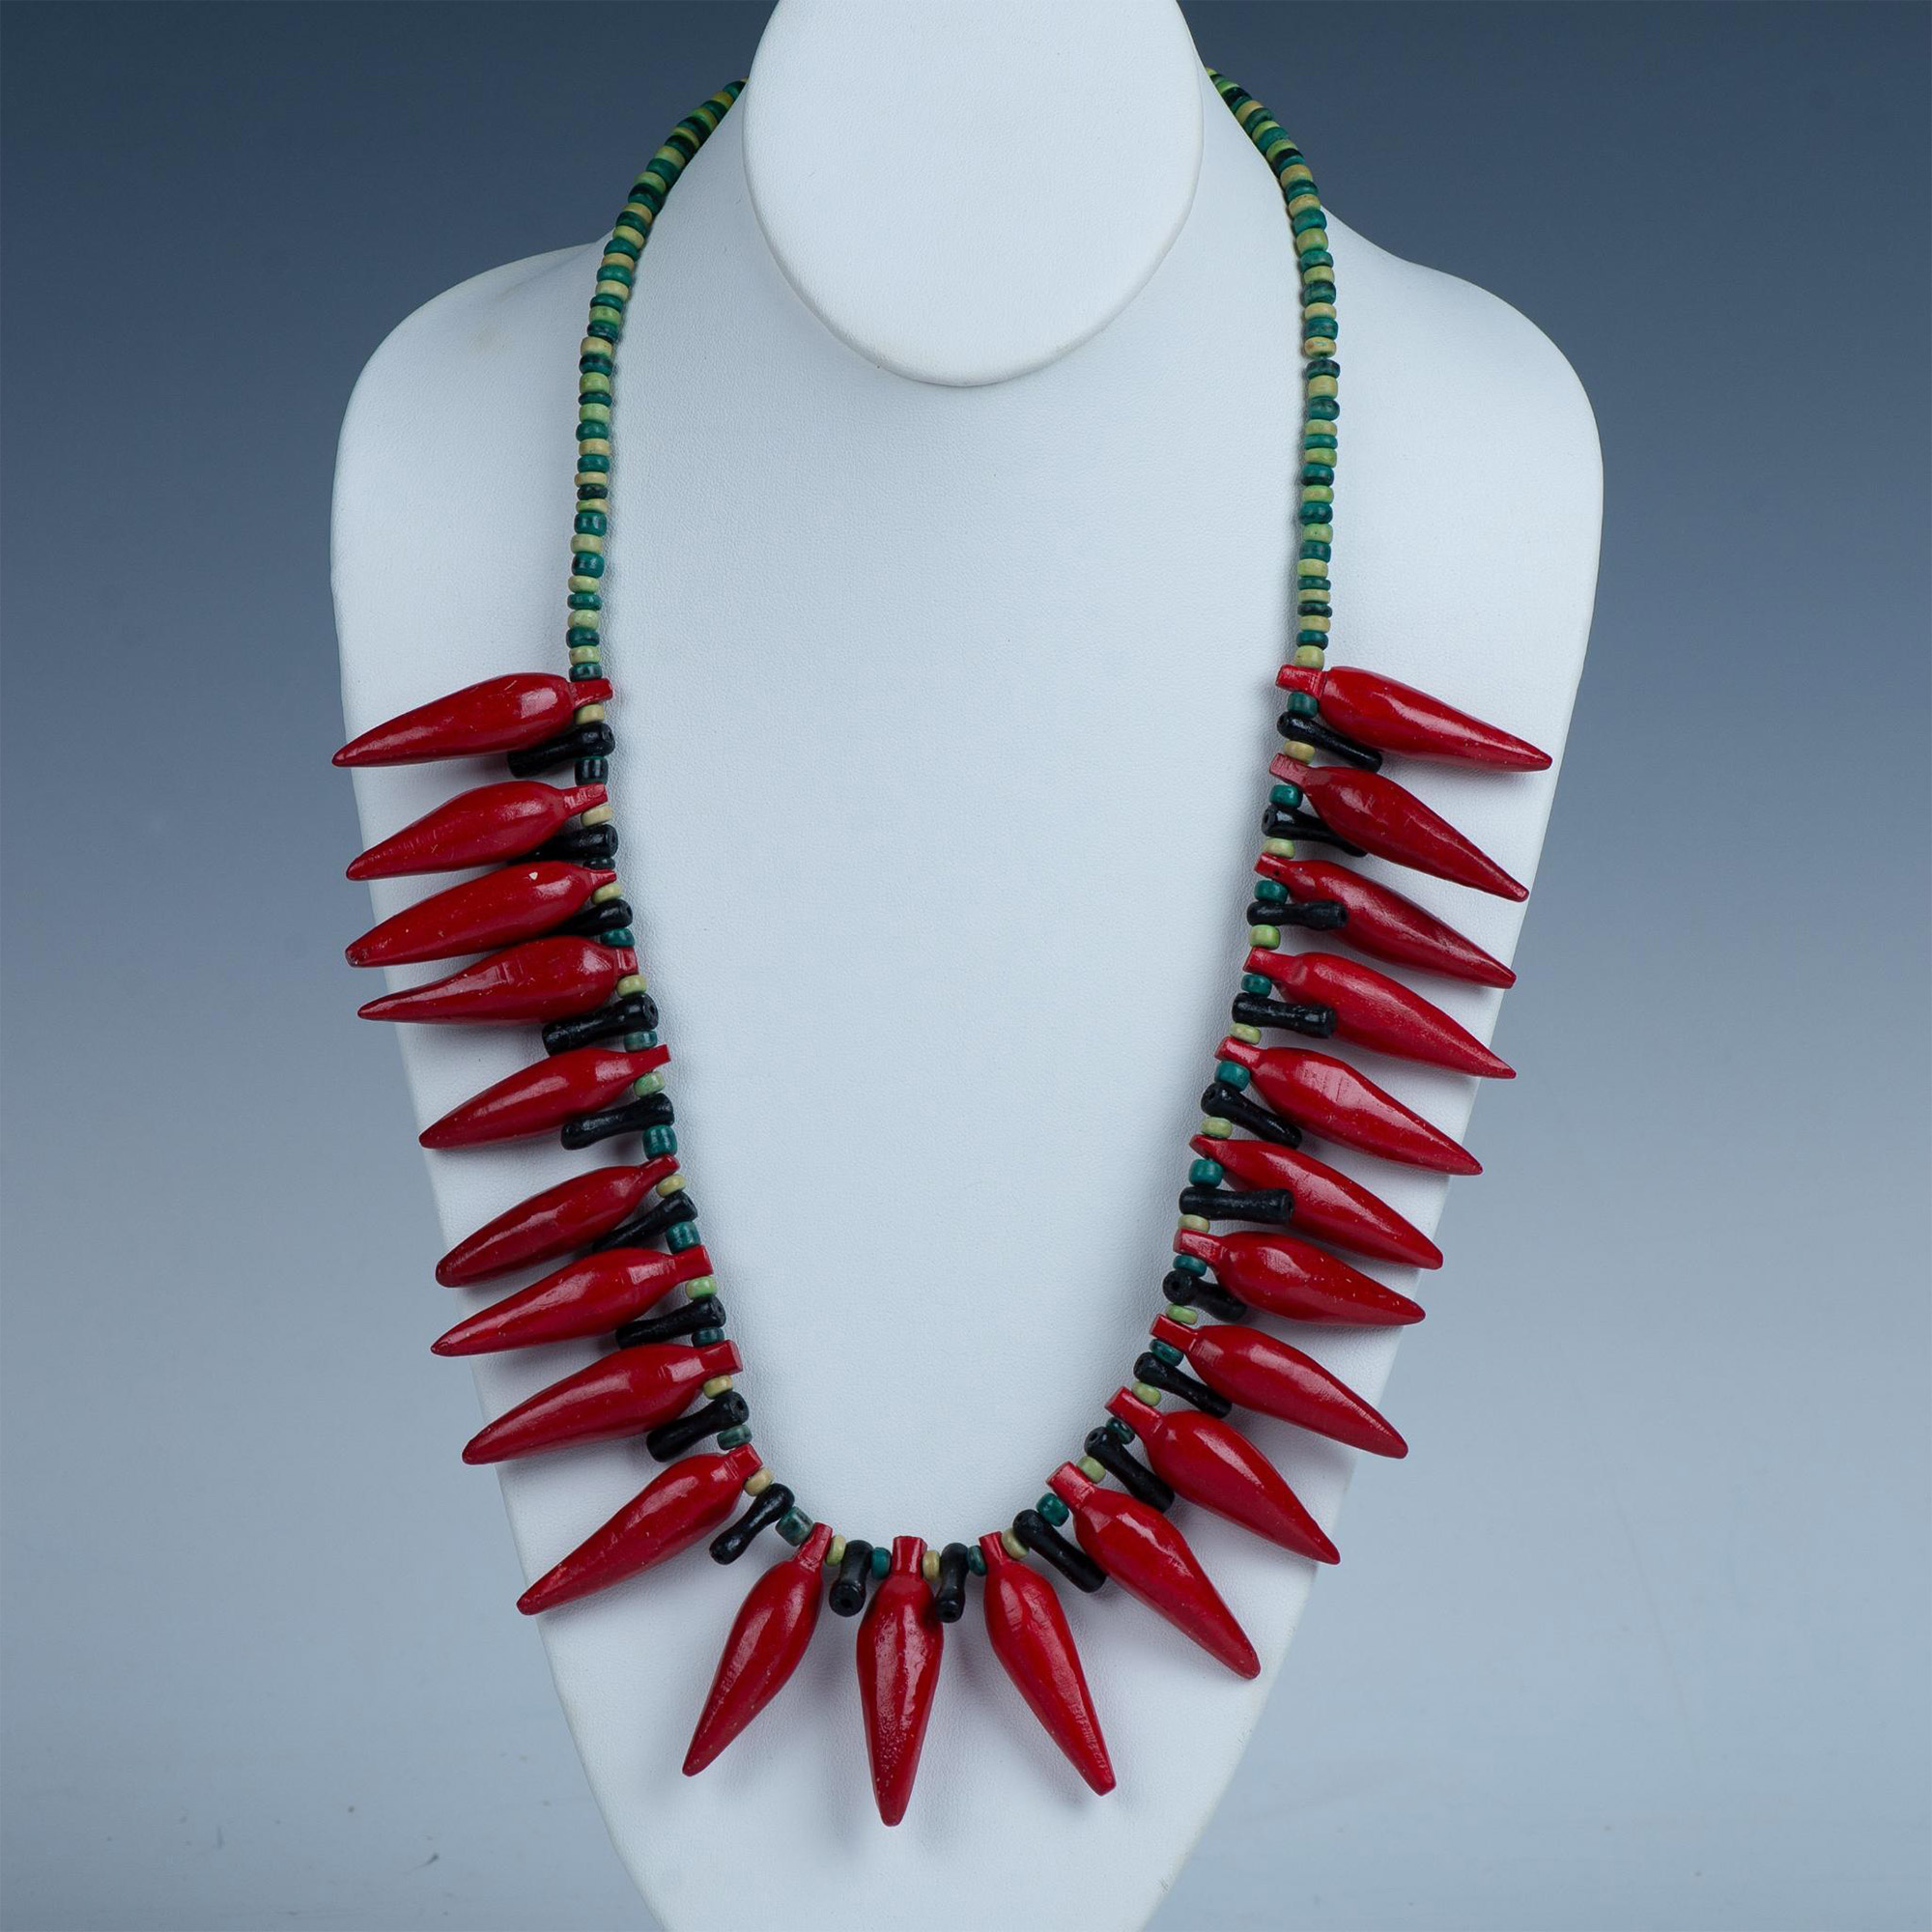 Retro Wood Red Chili Pepper Necklace - Image 2 of 6